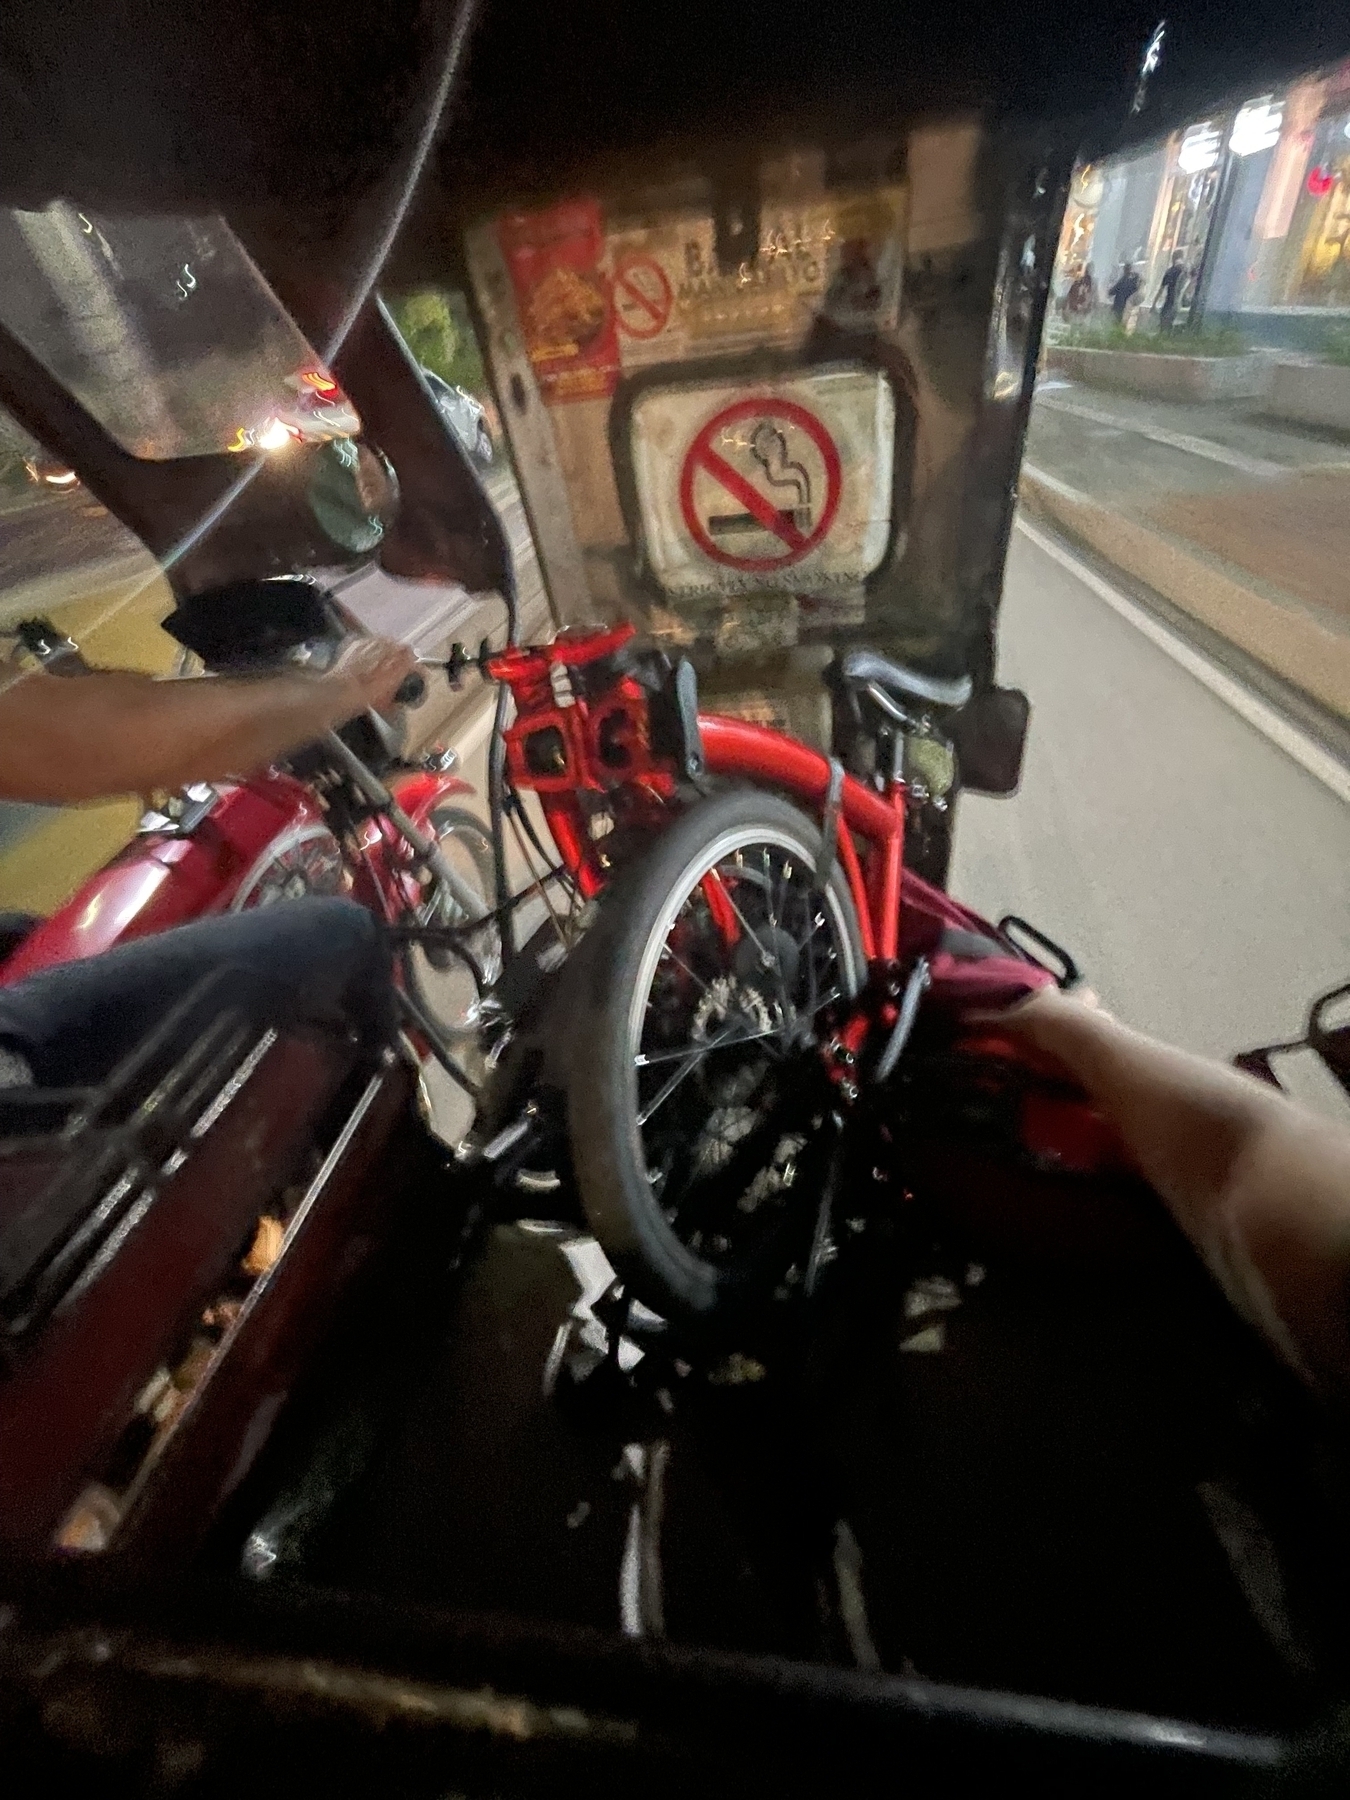 Chi’s folding bike in the middle of a tricycle’s cabin, folded neatly to fit within the seat. Chi’s bag, which usually is attached to the front of the bike, is found on the right side of the bike, near the tricycle’s entrance, to help keep it in place as the trip goes on.